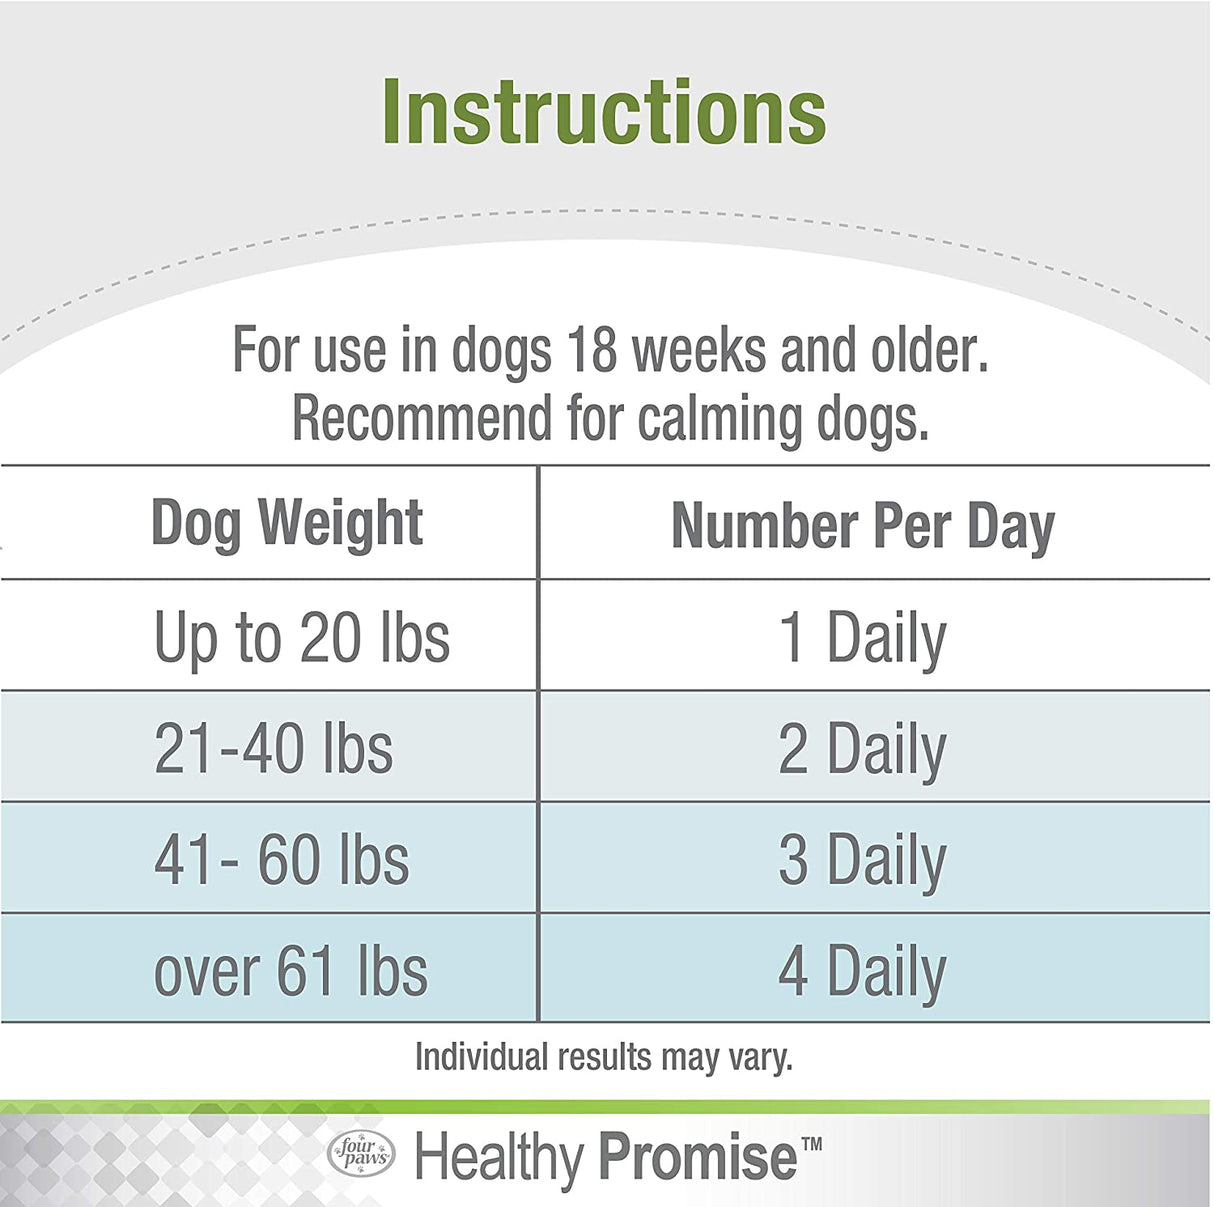 540 count (6 x 90 ct) Four Paws Healthy Promise Calming Aid for Dogs